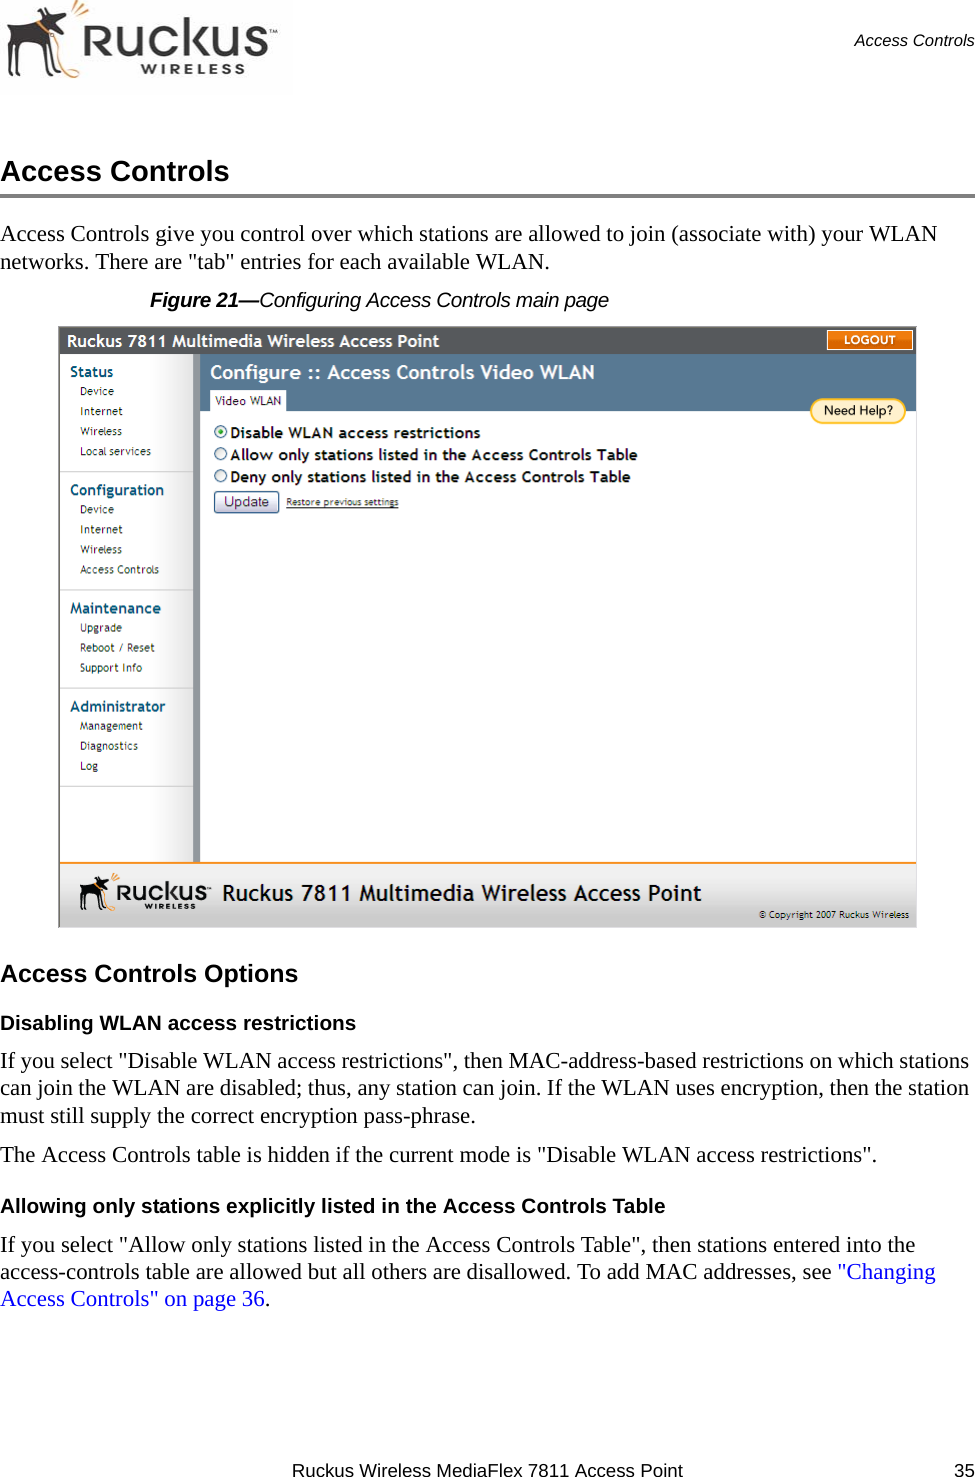 Ruckus Wireless MediaFlex 7811 Access Point 35Access ControlsAccess ControlsAccess Controls give you control over which stations are allowed to join (associate with) your WLAN networks. There are &quot;tab&quot; entries for each available WLAN. Figure 21—Configuring Access Controls main pageAccess Controls OptionsDisabling WLAN access restrictionsIf you select &quot;Disable WLAN access restrictions&quot;, then MAC-address-based restrictions on which stations can join the WLAN are disabled; thus, any station can join. If the WLAN uses encryption, then the station must still supply the correct encryption pass-phrase. The Access Controls table is hidden if the current mode is &quot;Disable WLAN access restrictions&quot;.Allowing only stations explicitly listed in the Access Controls TableIf you select &quot;Allow only stations listed in the Access Controls Table&quot;, then stations entered into the access-controls table are allowed but all others are disallowed. To add MAC addresses, see &quot;Changing Access Controls&quot; on page 36.